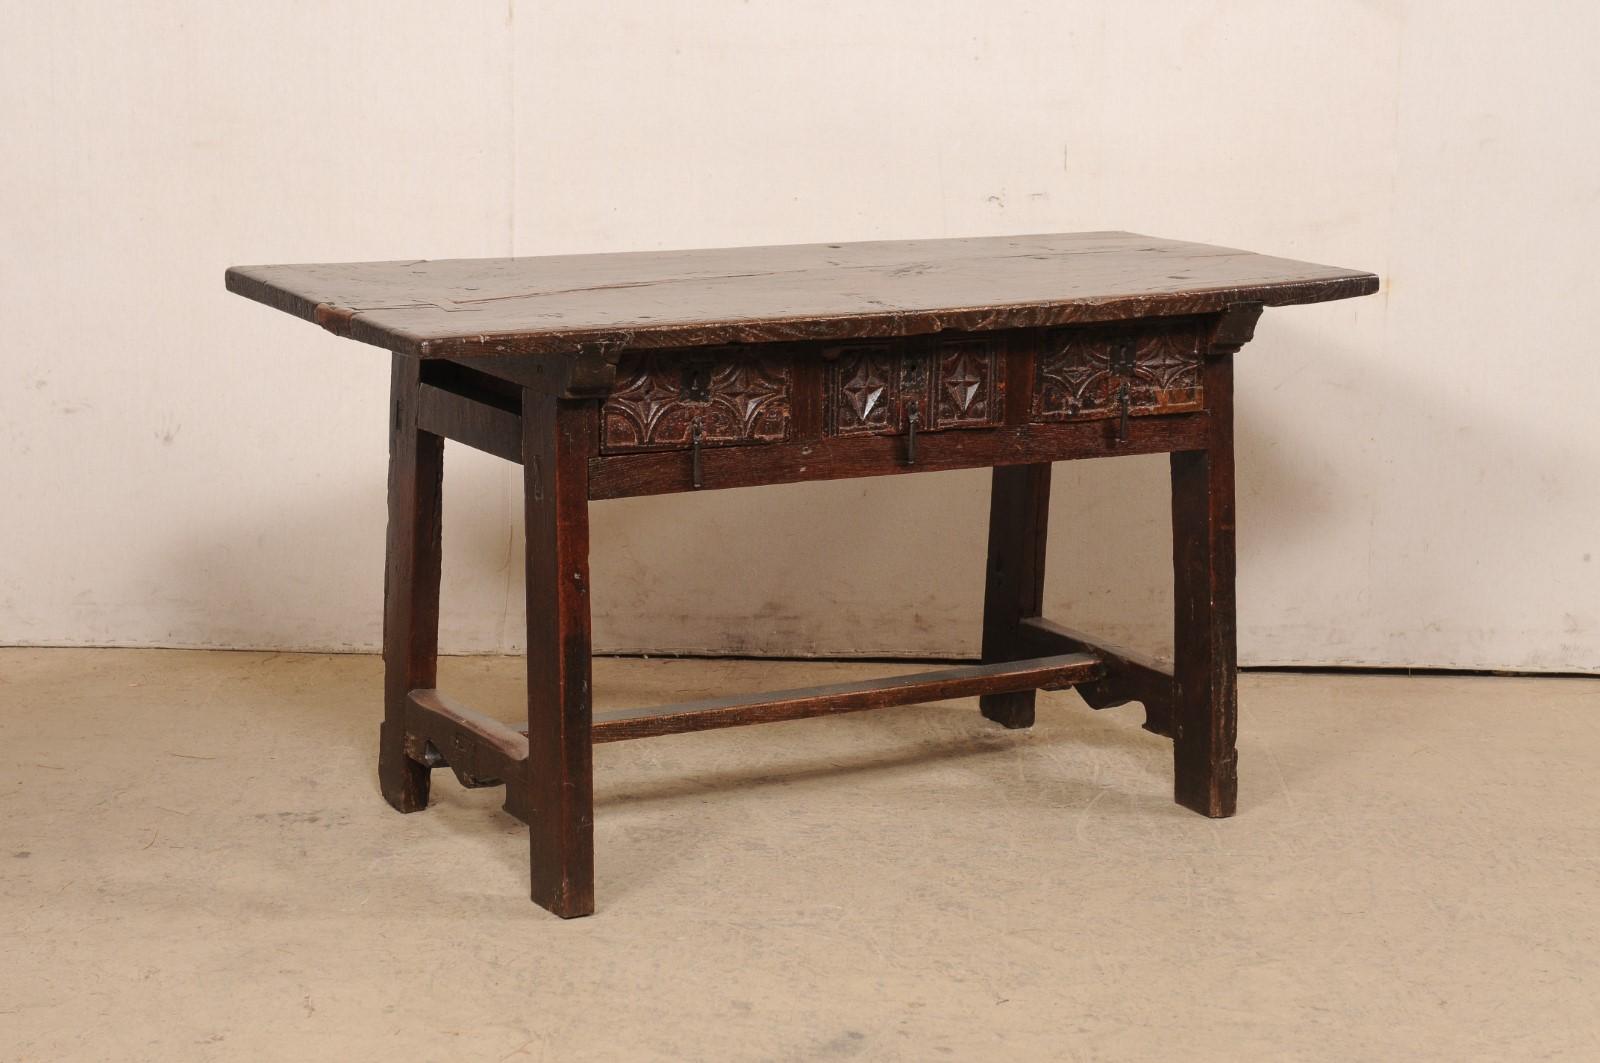 A Spanish carved wood table with drawers from the 18th century. This antique table from Spain has a rectangular-shaped top (beautifully aged with old butterfly repairs) which overhangs the apron below that houses three smaller-sized drawers at one